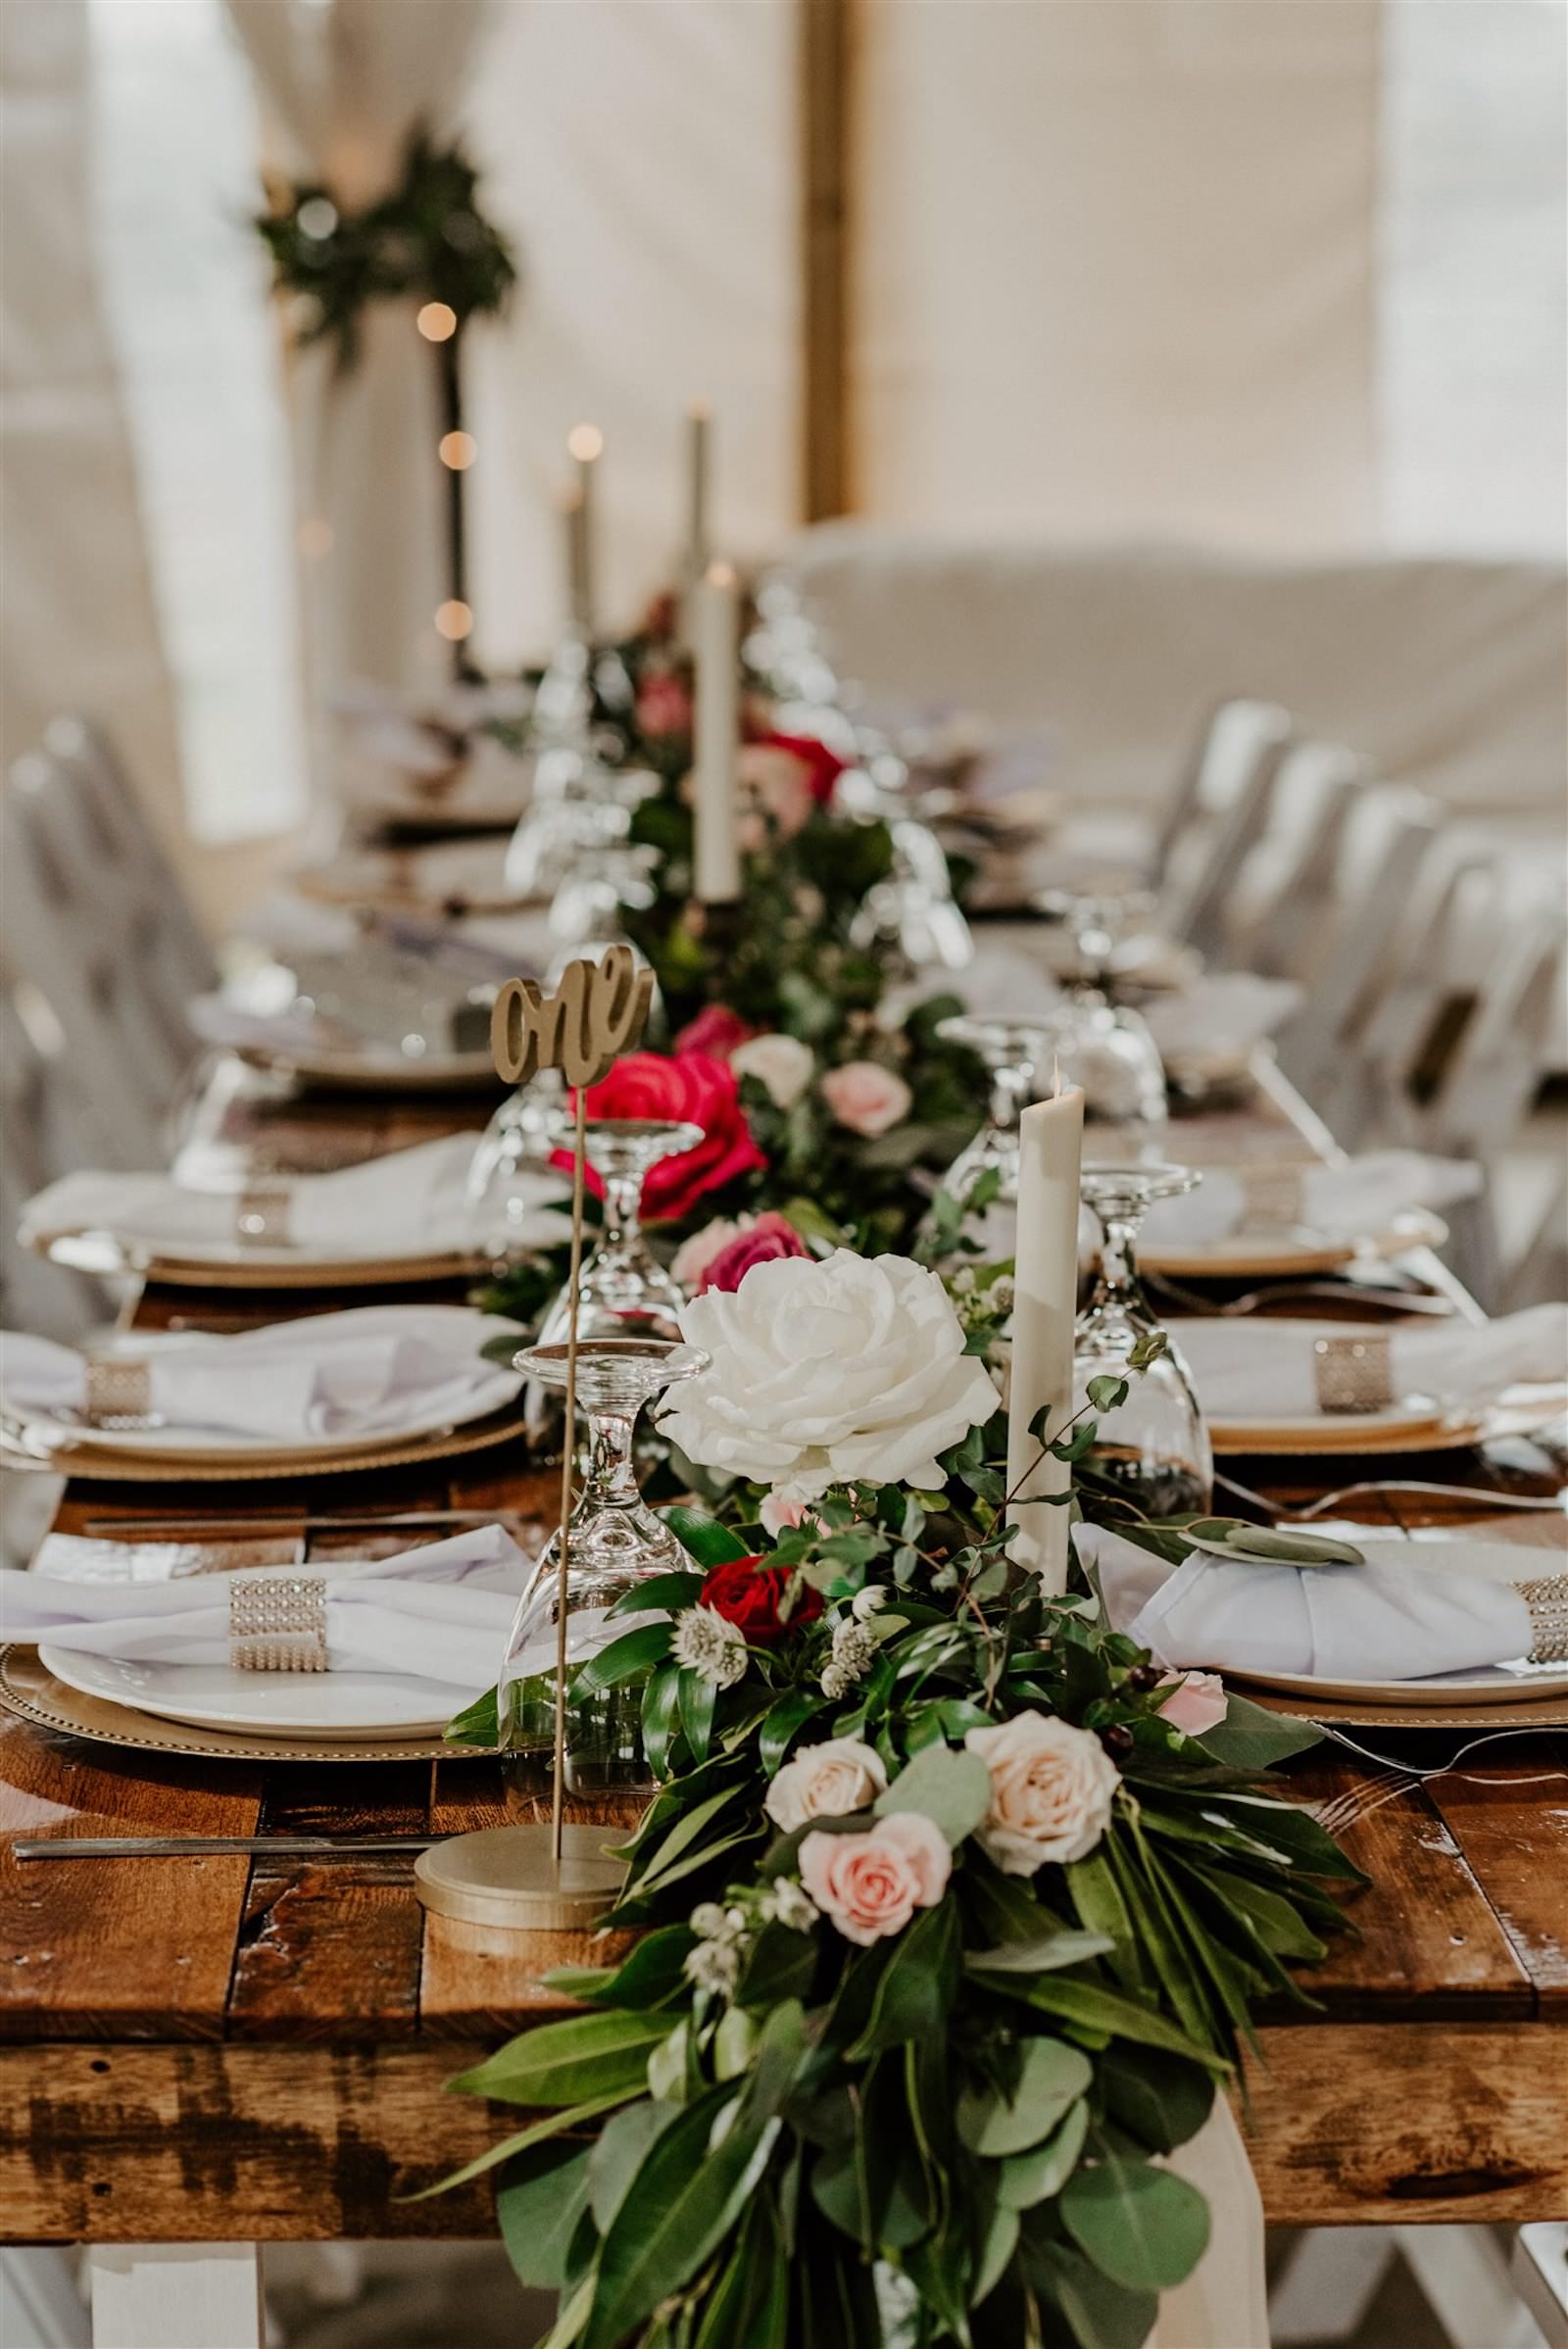 Rustic Barn Tampa Wedding Garland Centerpieces with Blush Pink and Deep Red Burgundy Roses and Greenery | Wood Farm Tables with Champagne Linen Runners and Taper Candlestick Candles and White Garden Chairs | Tampa Wedding Florist Monarch Events and Designs